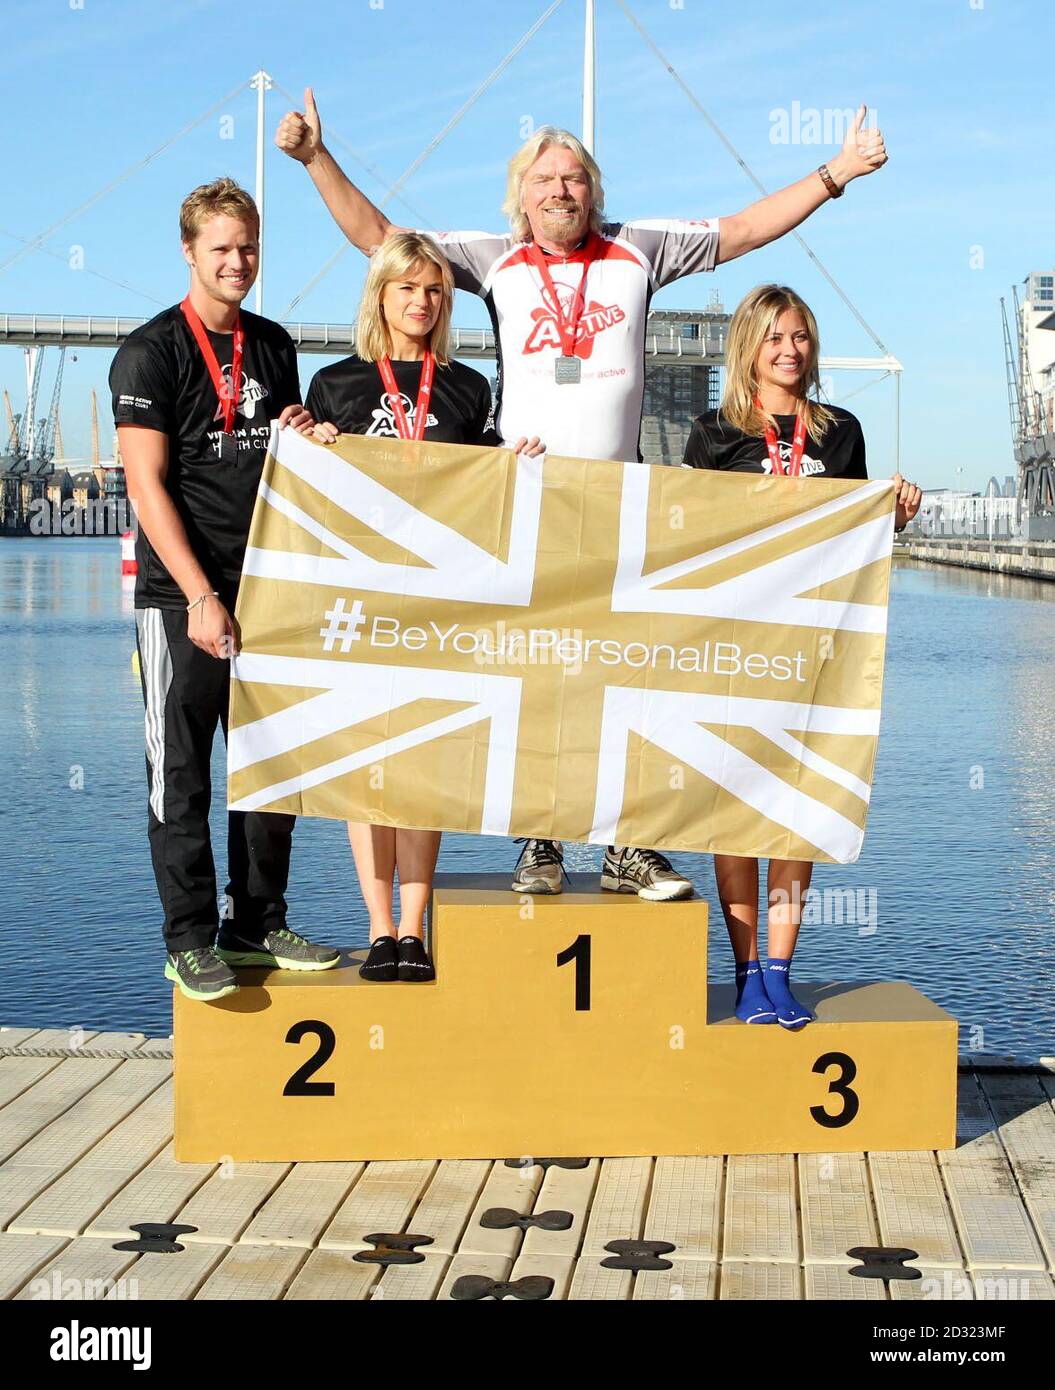 Sir Richard Branson (centre) with his son Sam, Isabella Calthorpe (2nd left) and his daughter Holly at the Virgin Active London Triathlon at the Excel Conference Centre, London. Stock Photo